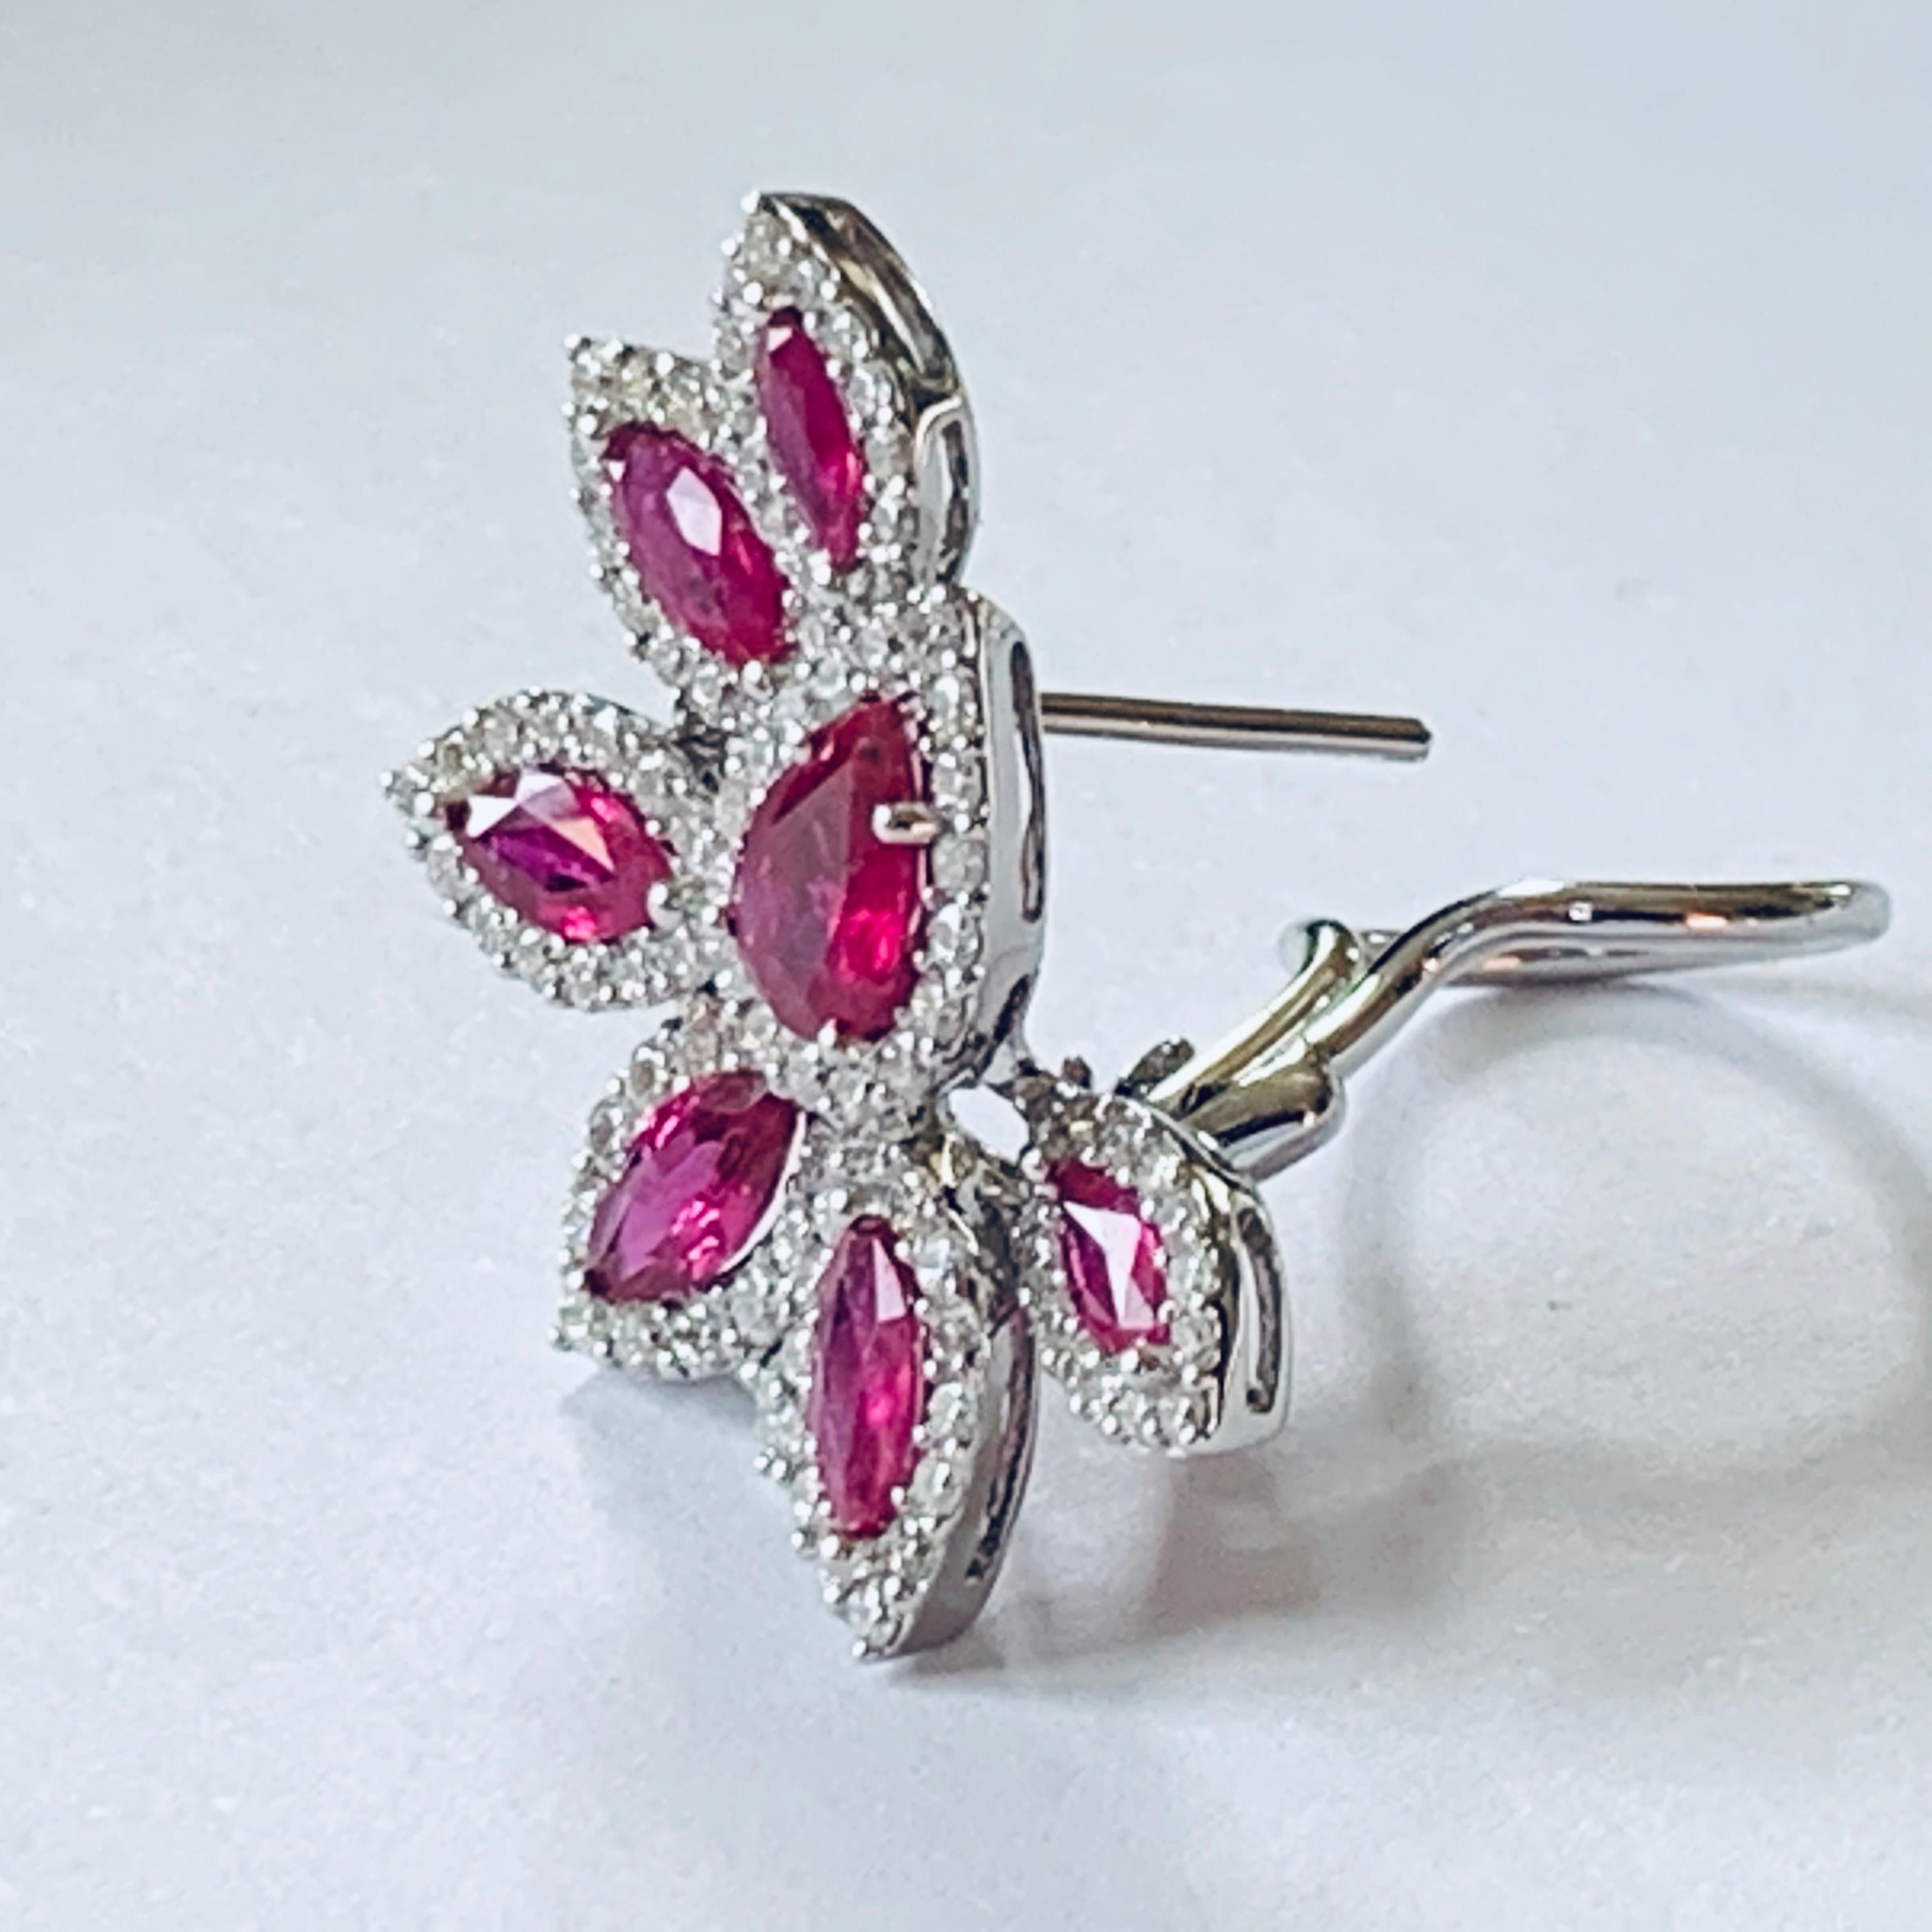 Elegant and Classy 18 Karat White Gold Ruby and Diamond Cluster Earrings For Sale 3